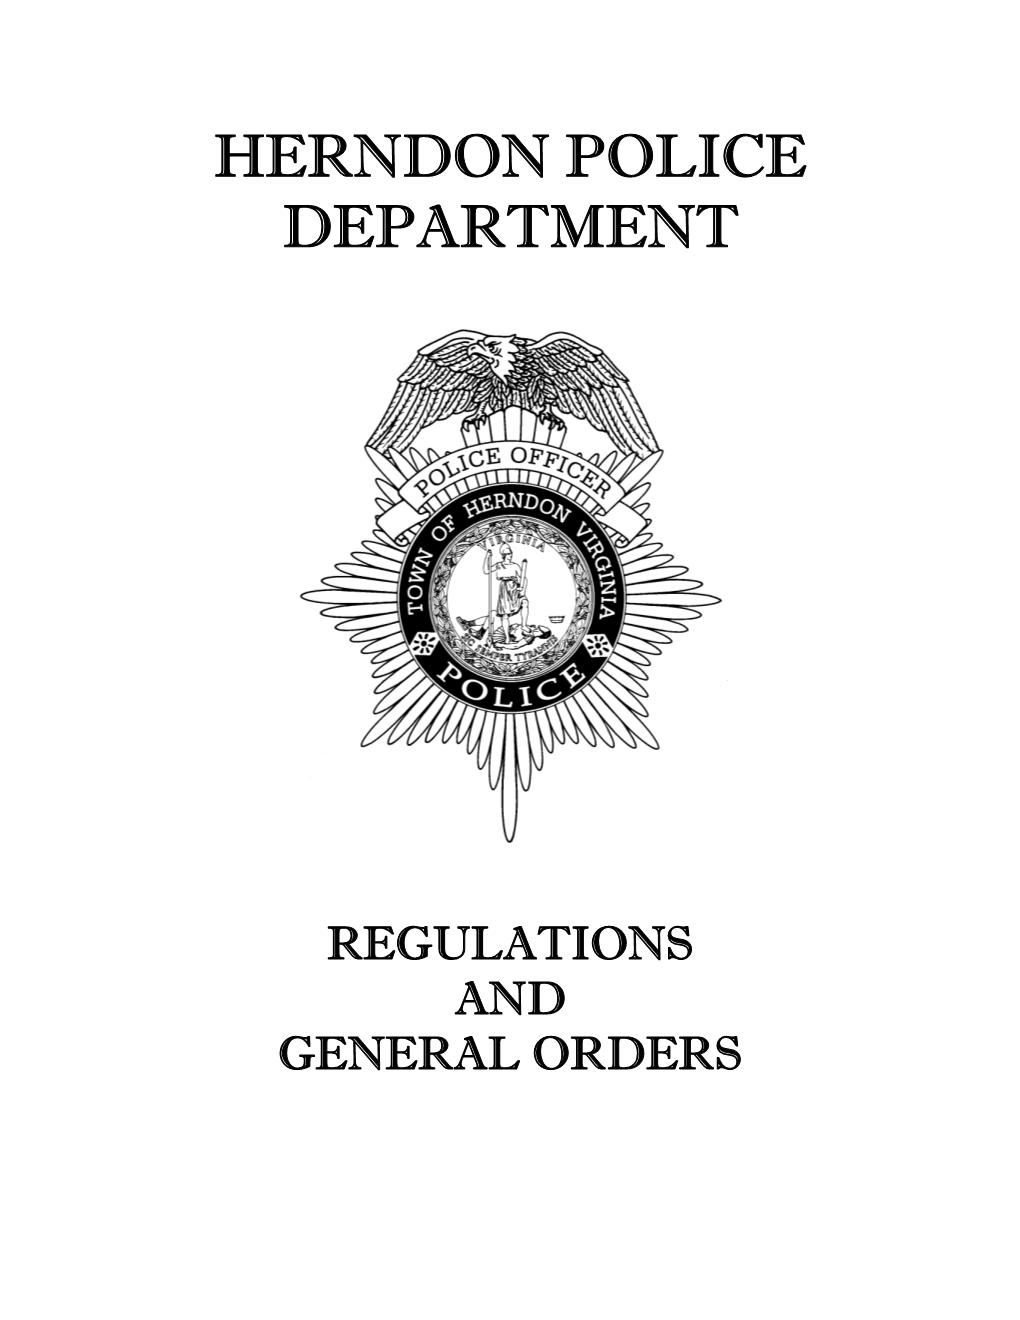 Regulations and General Orders